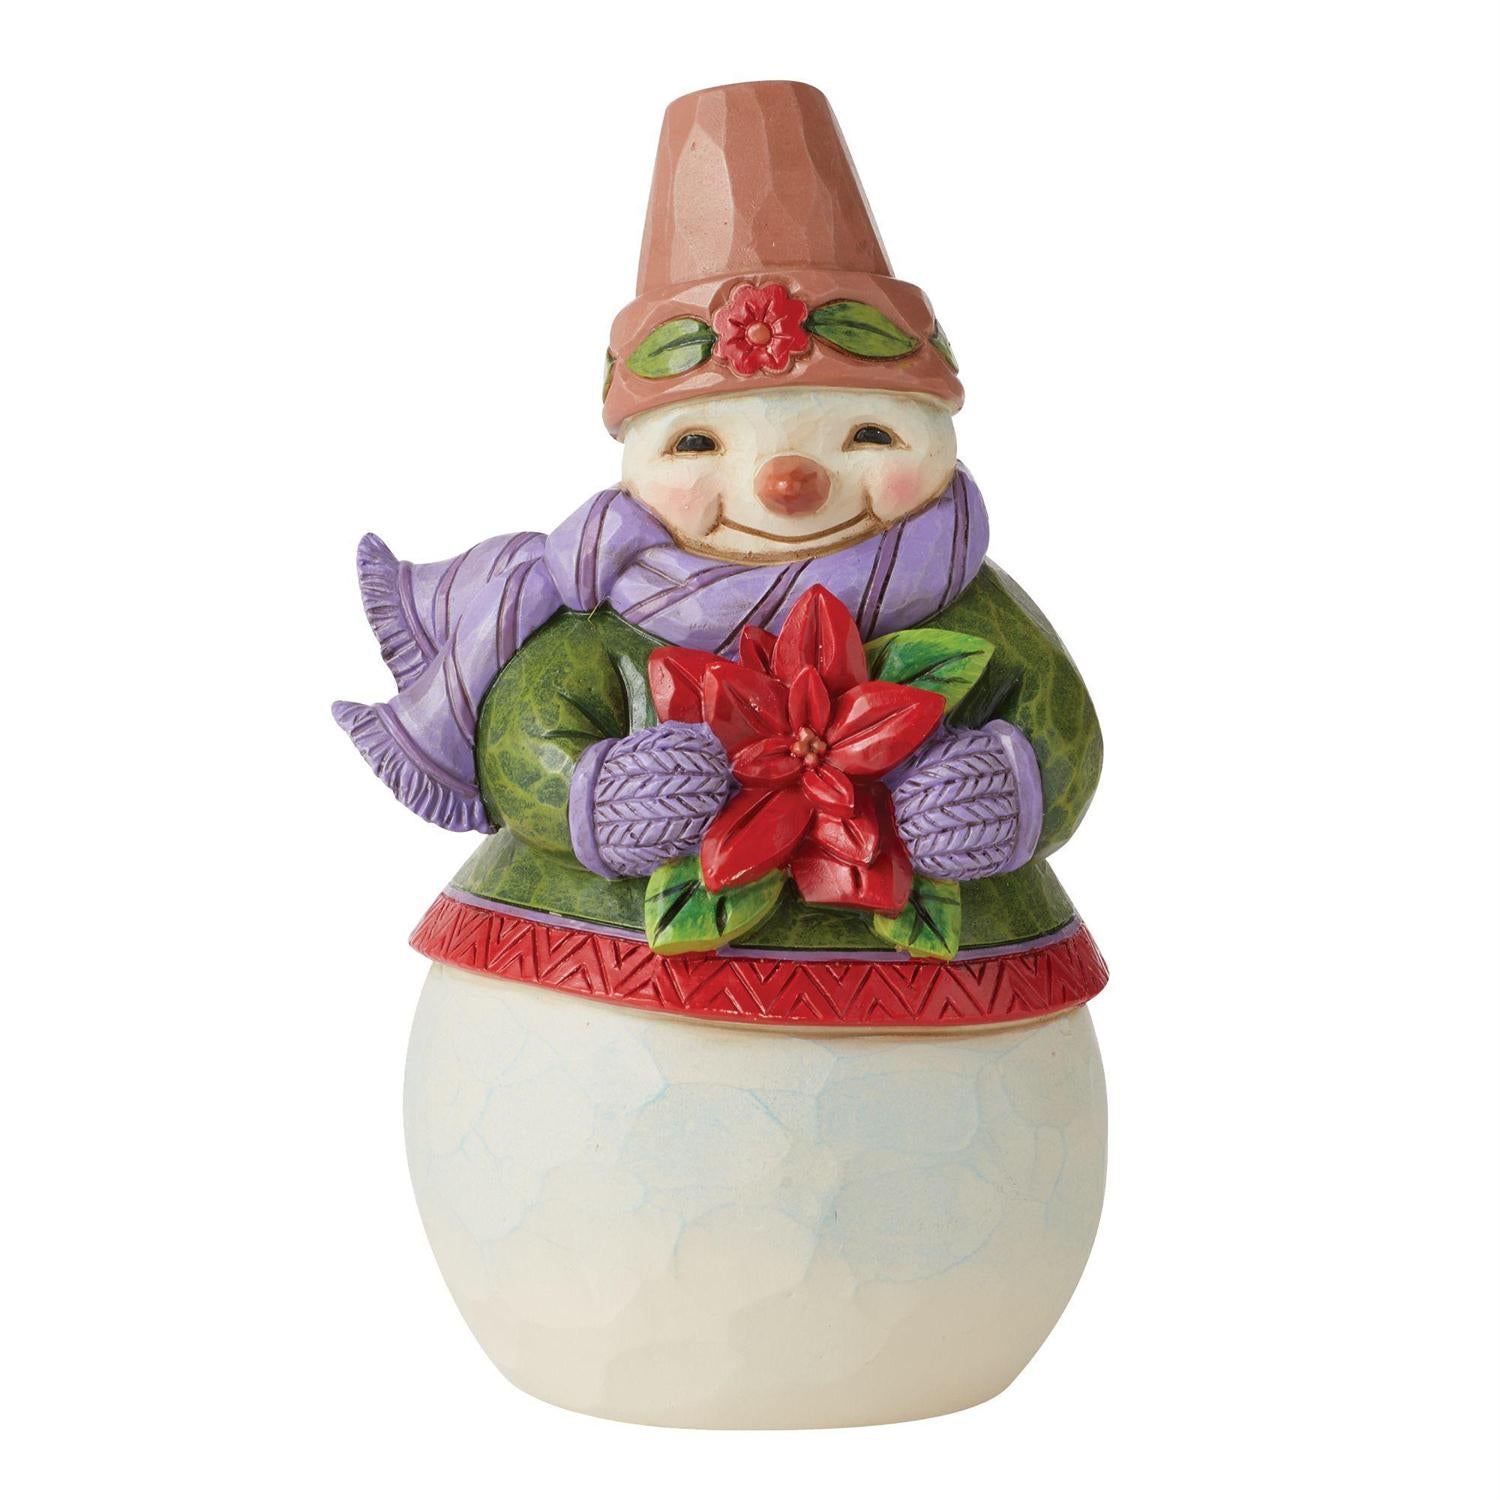 Pint Sized Snowman with Poinsettia - Lake Norman Gifts